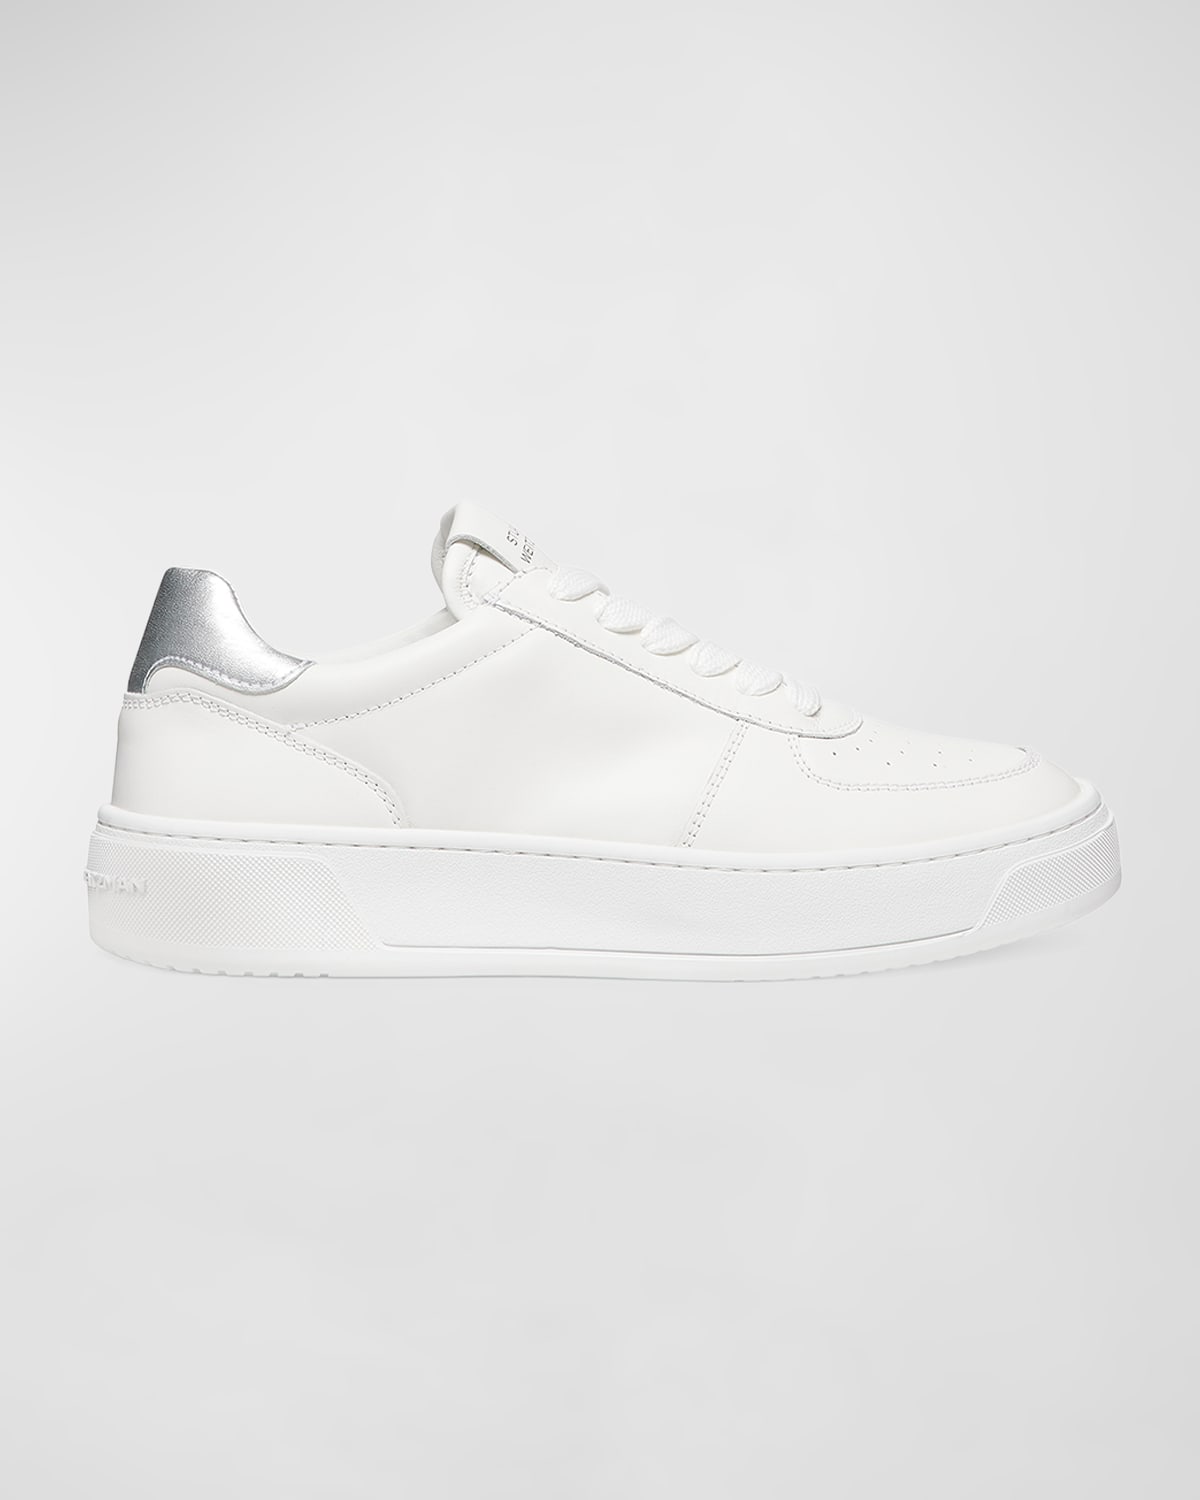 Stuart Weitzman Women's Sw Courtside Lace Up Low Top Sneakers In White Silver